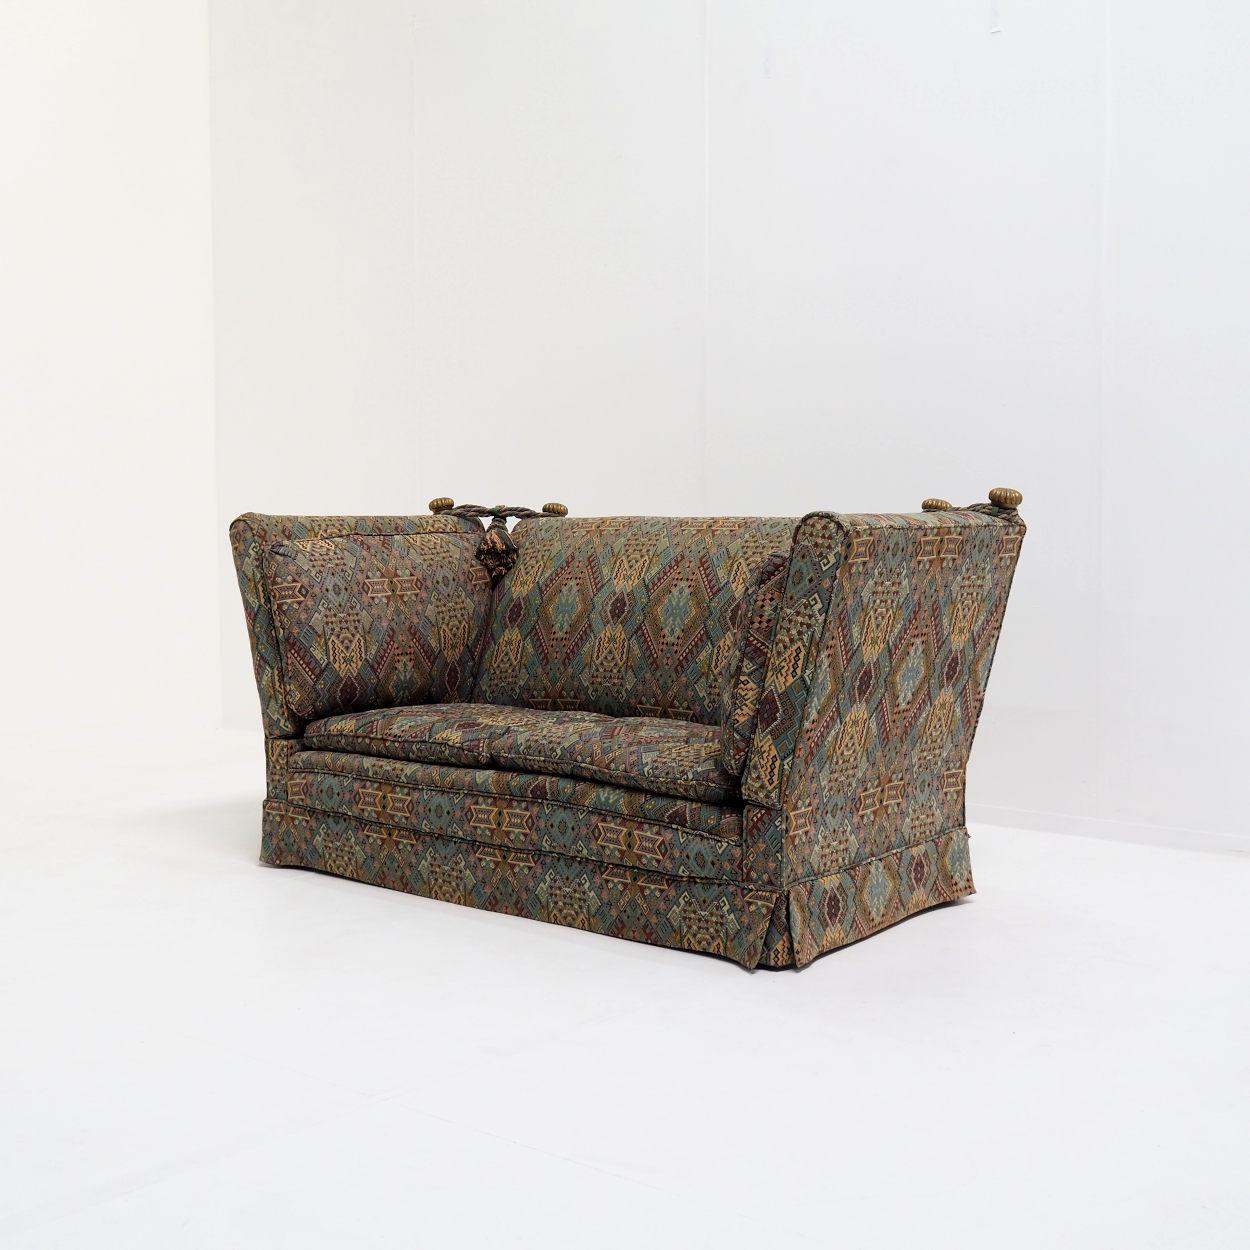 Regency Two Seater Knole Sofa in 'Arts And Crafts' Upholstery For Sale